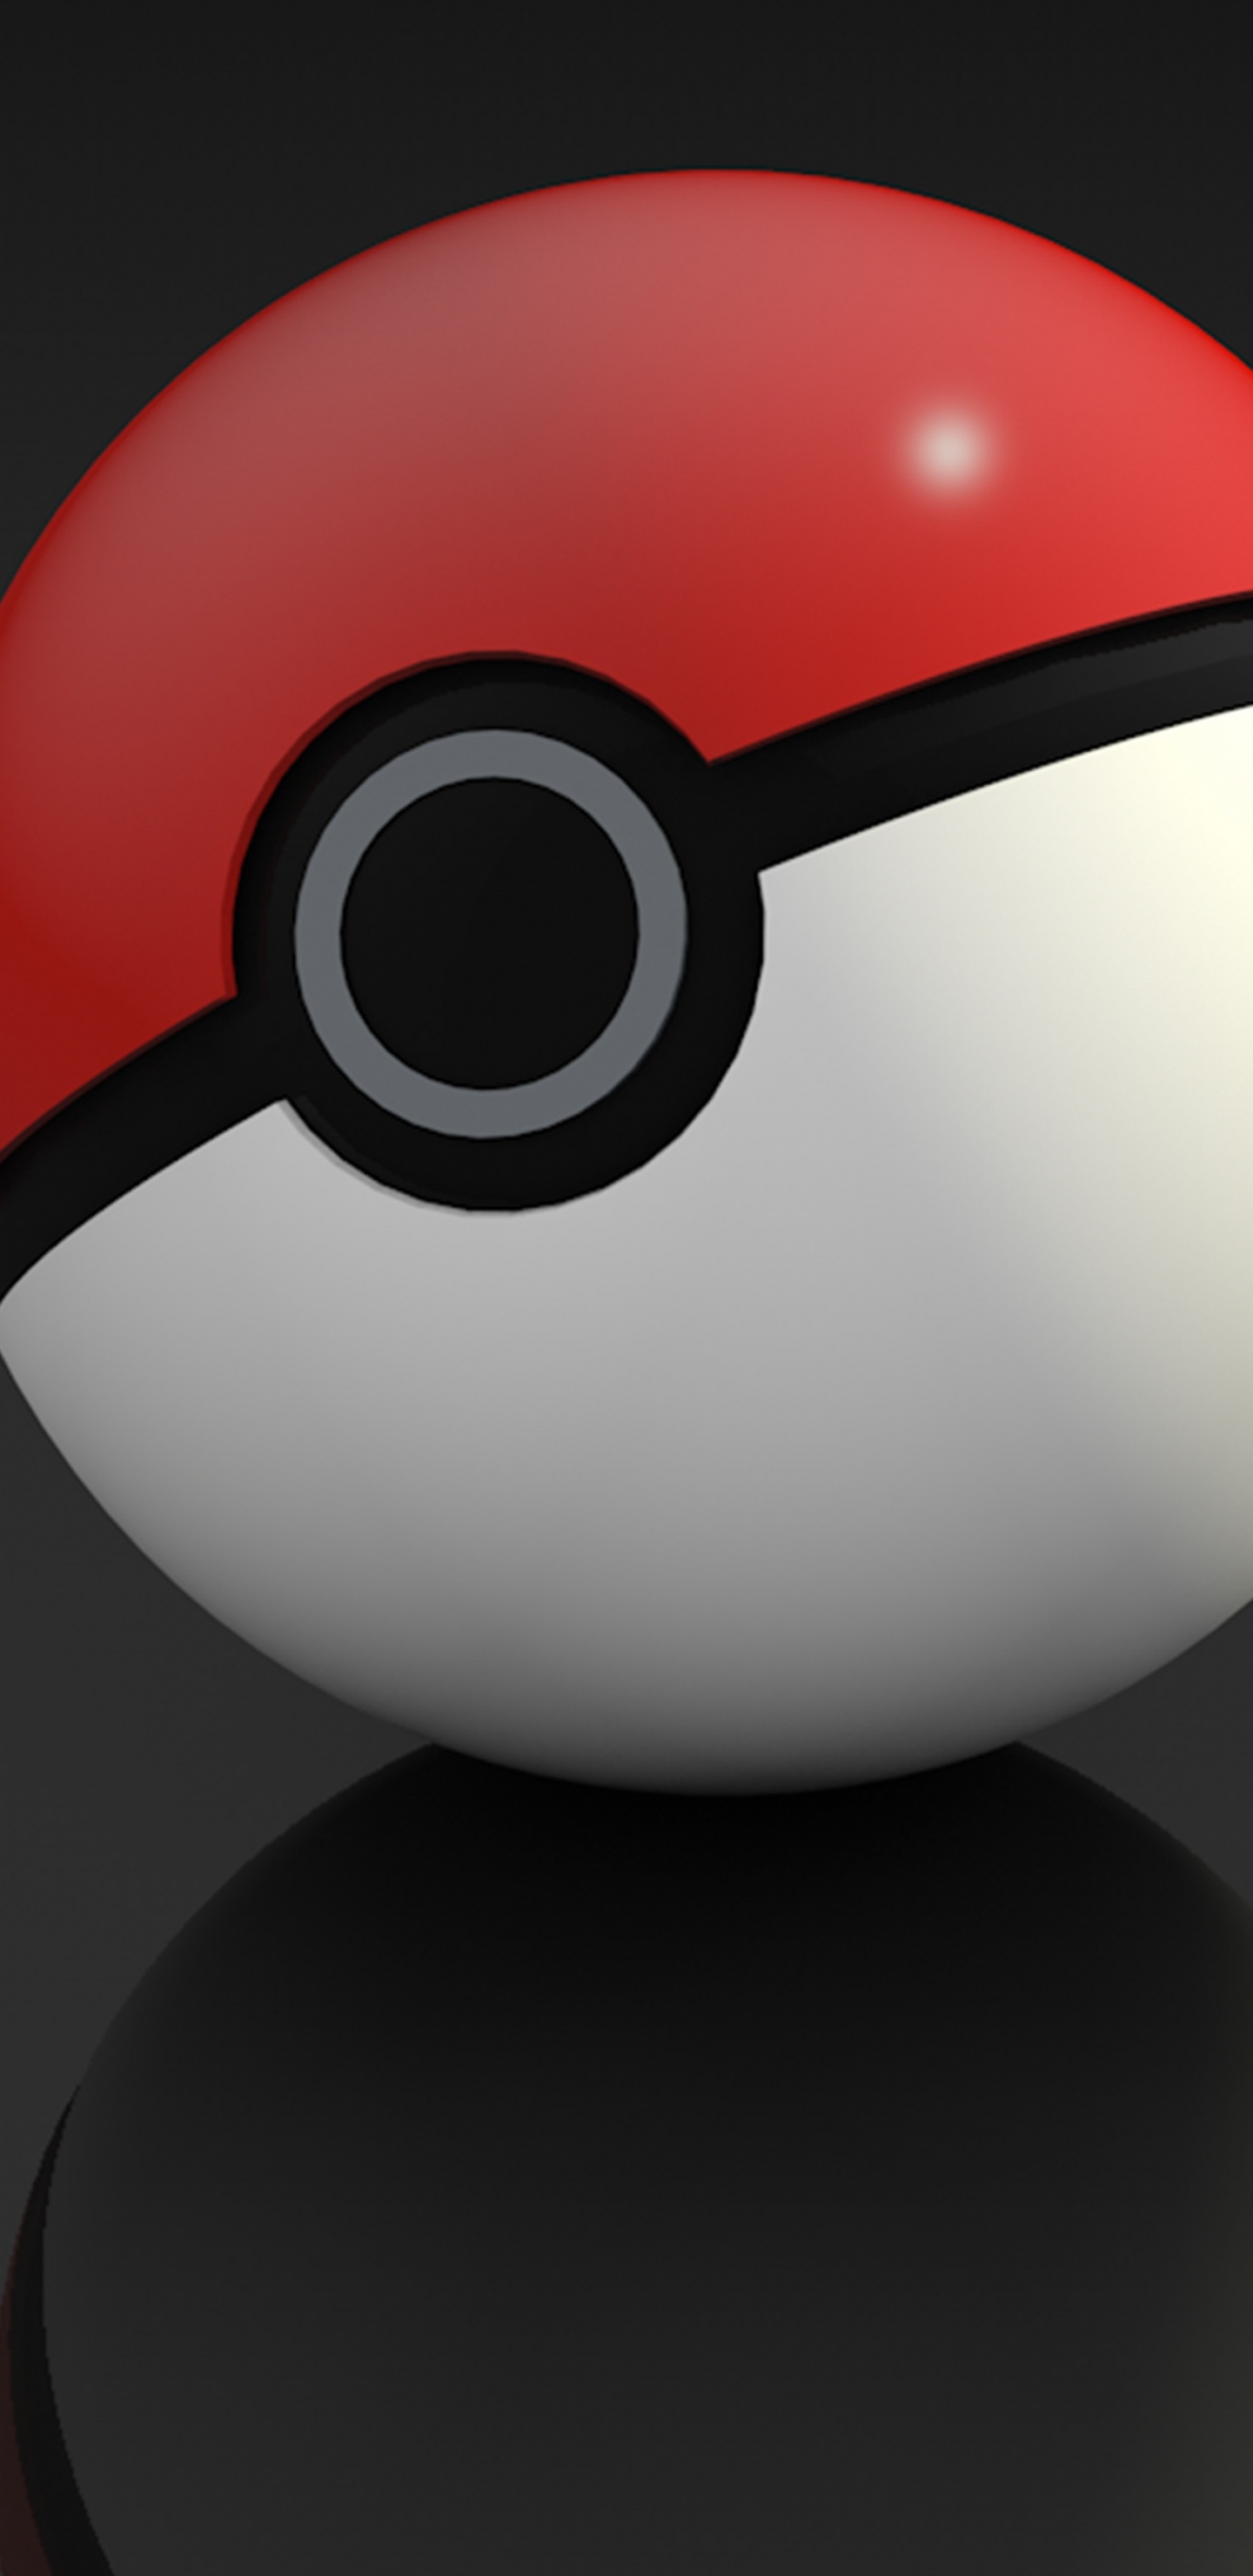 Pok Ball, Ball, Animation, Auge, Games. Wallpaper in 1440x2960 Resolution